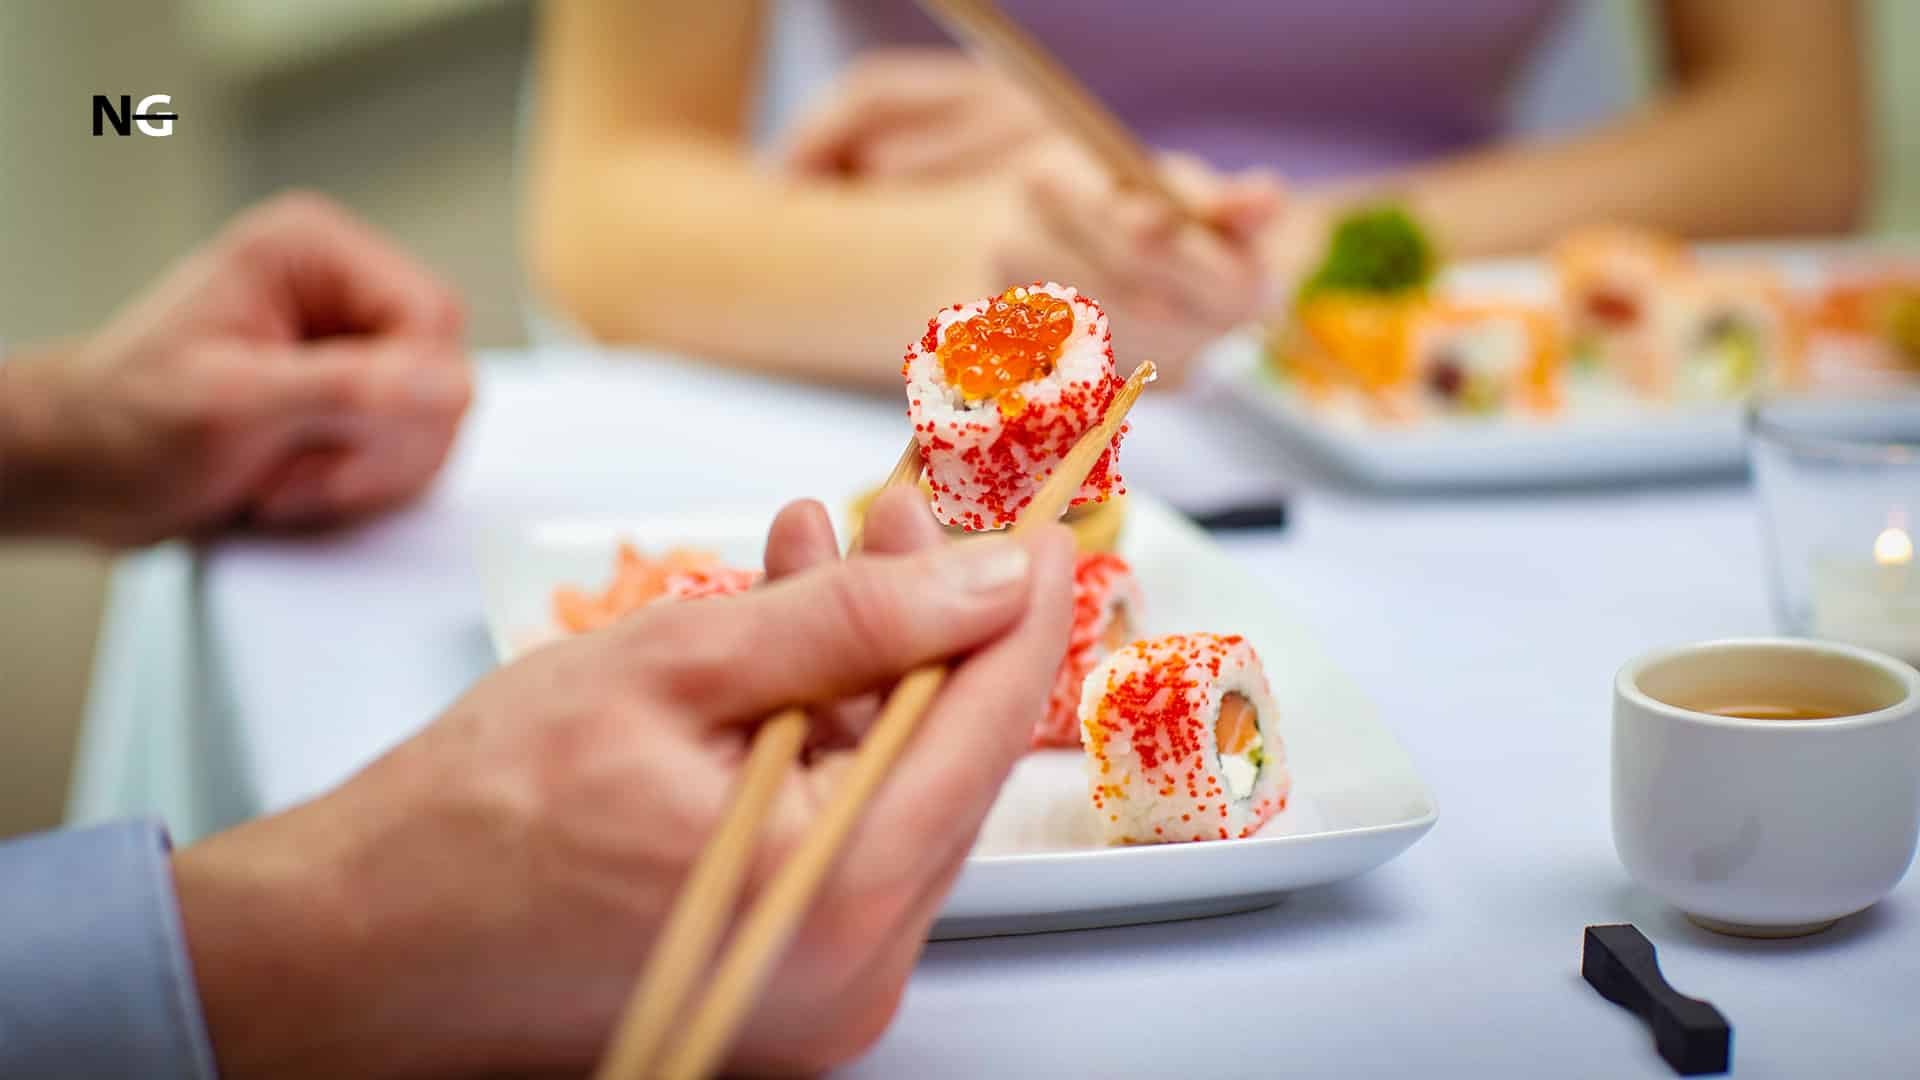 Tips for Sushi Dining for People on a Gluten-Free Diet